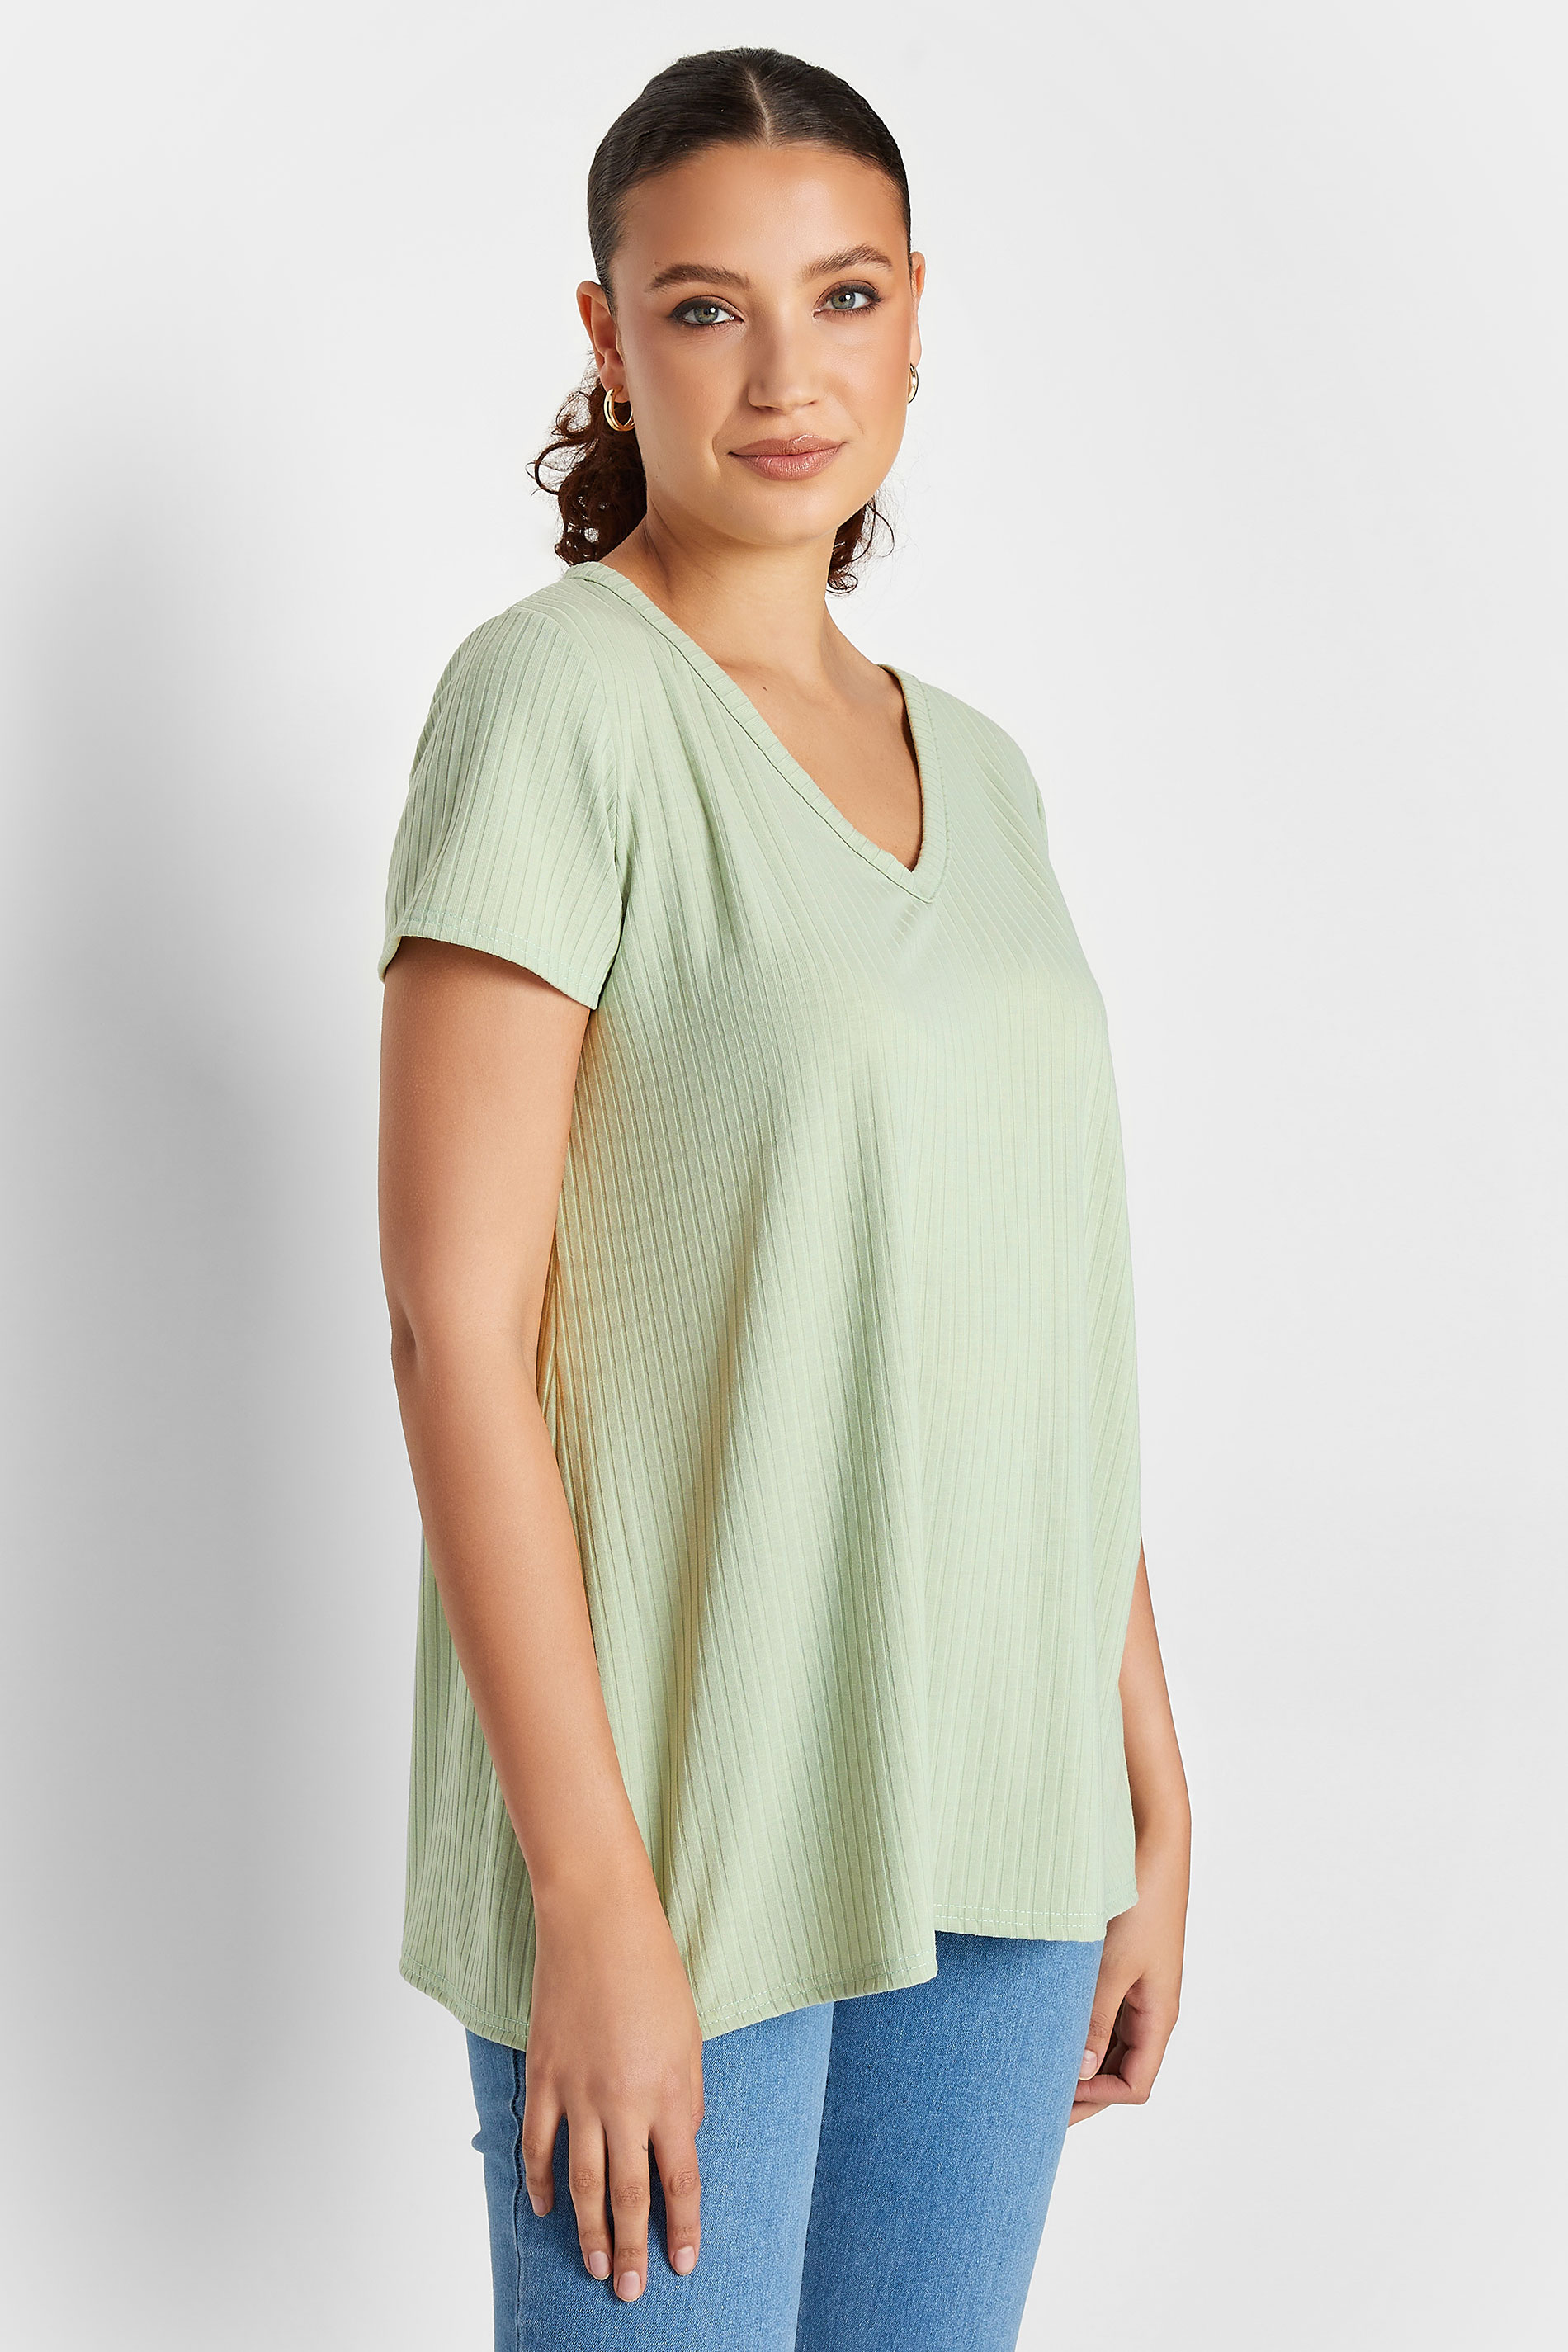 LTS Tall Women's Sage Green Ribbed V-Neck Swing Top | Long Tall Sally  1